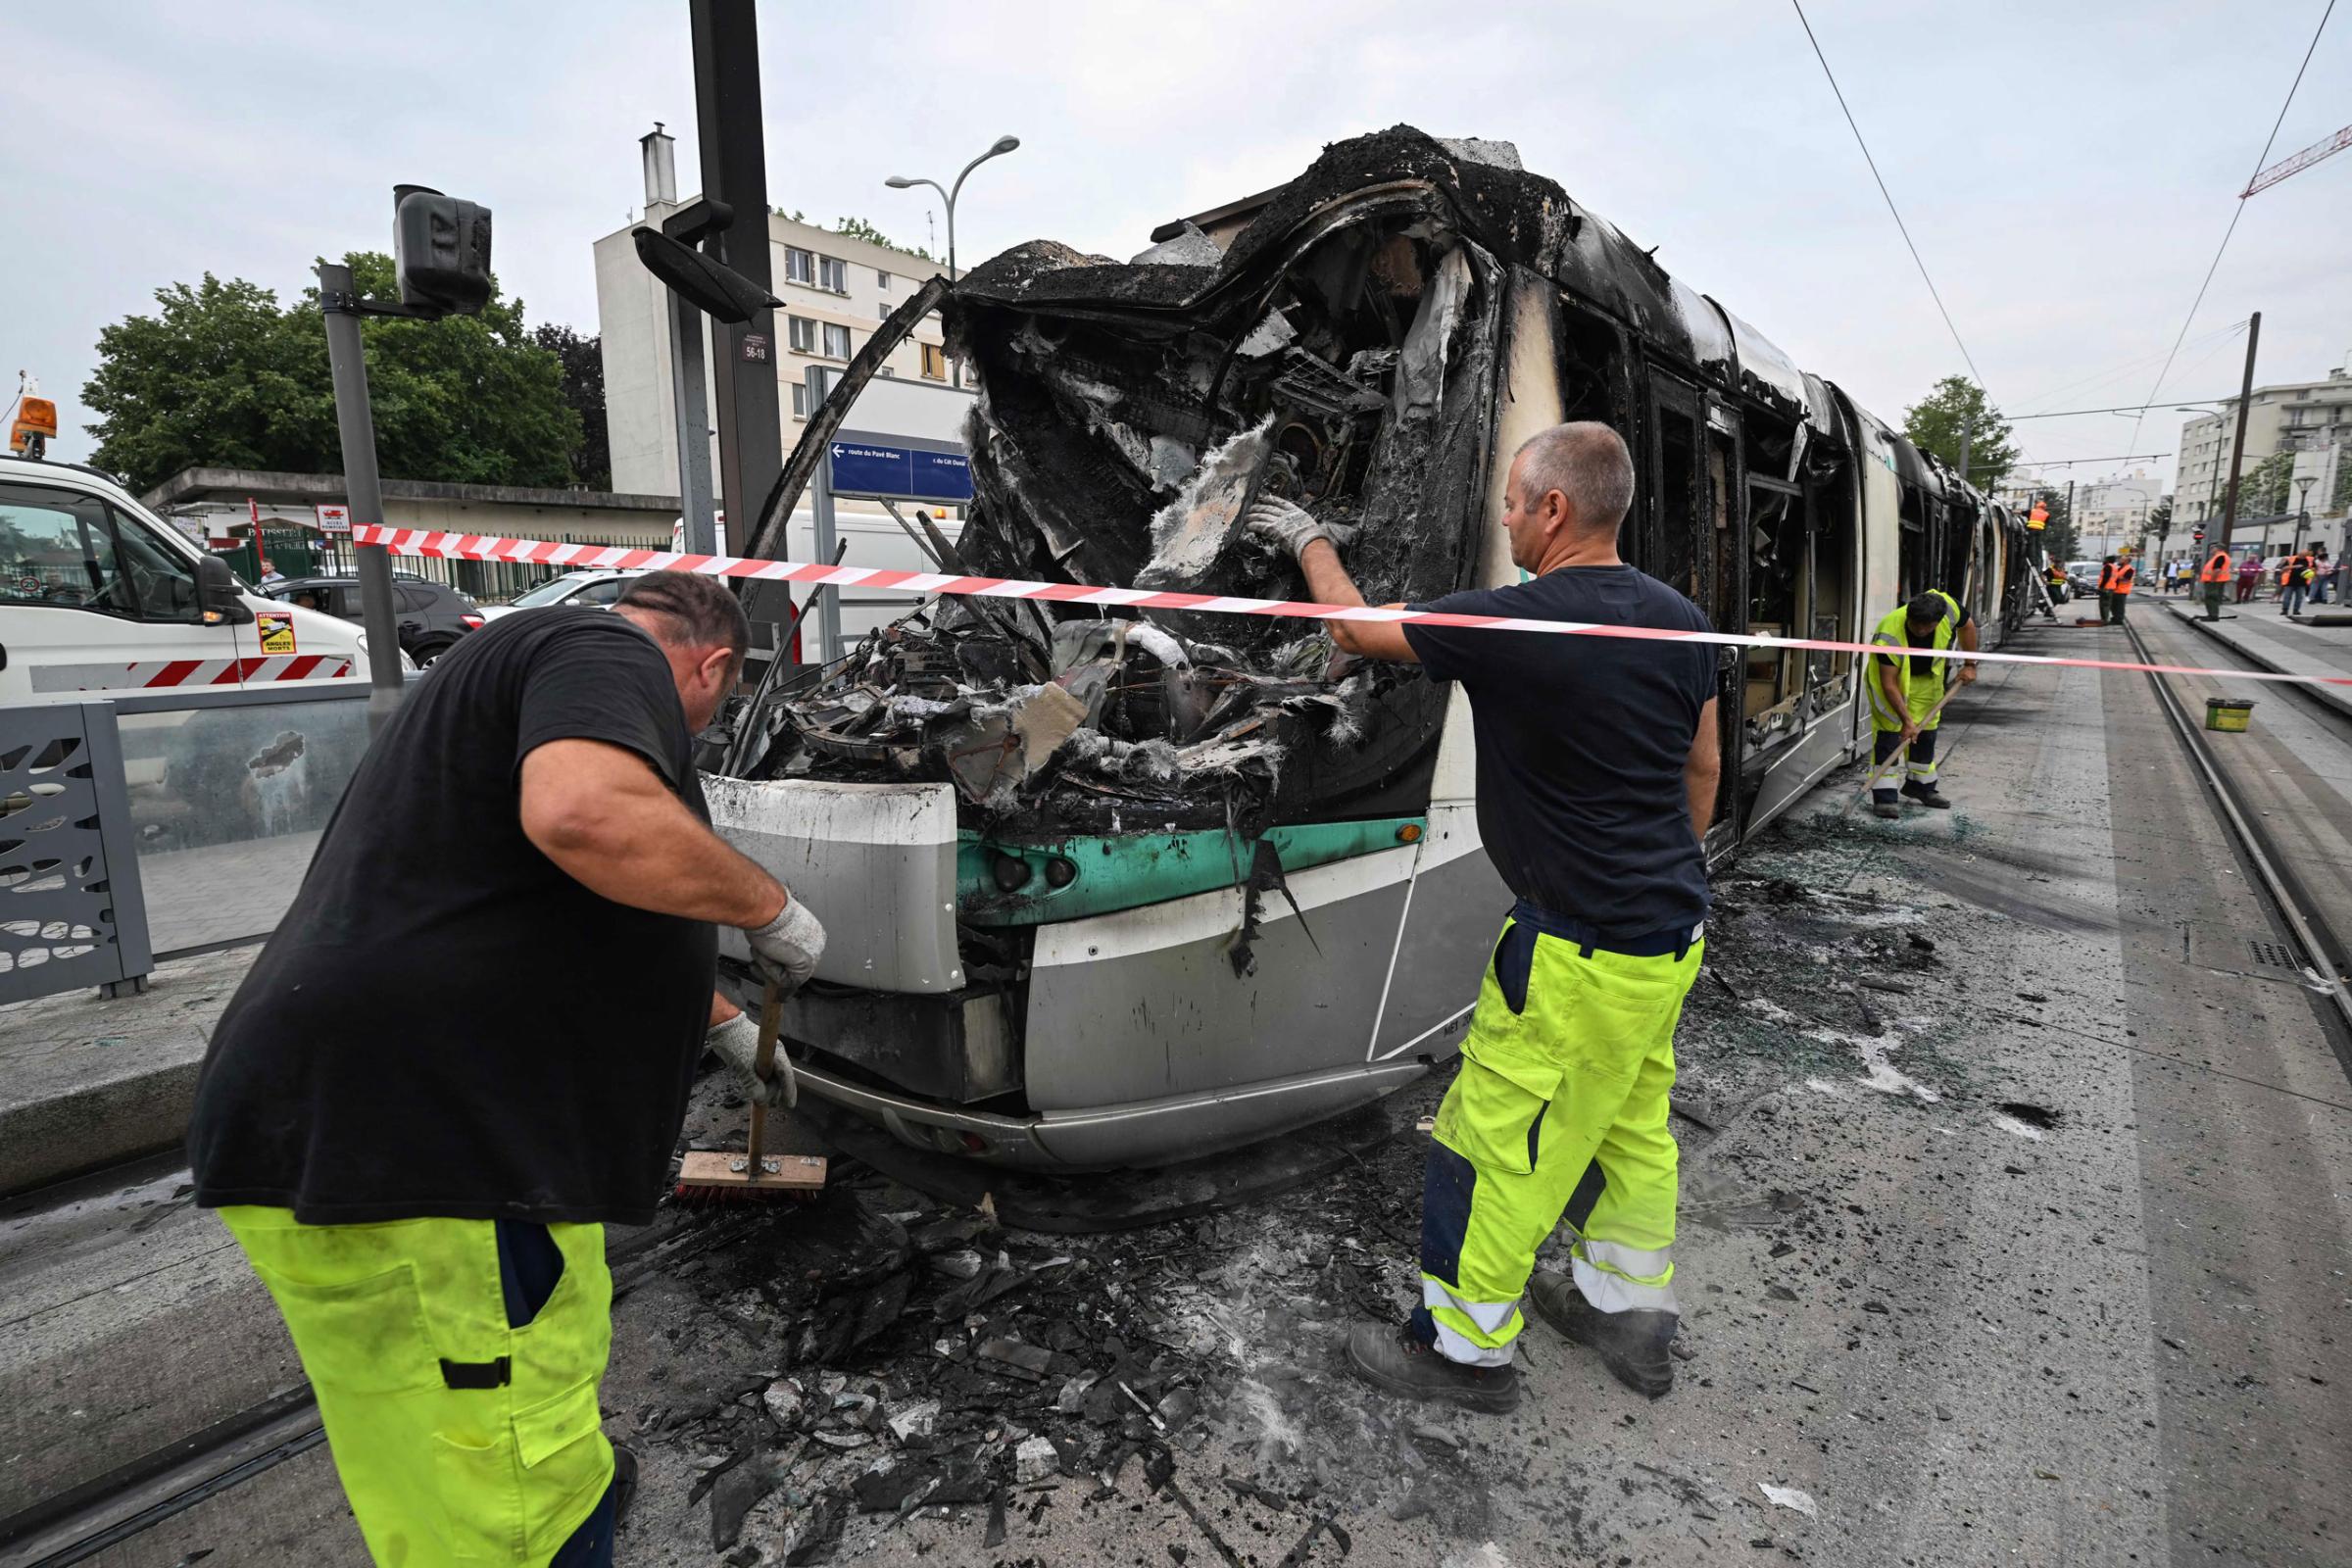 Workers clean up the debris of a burnt tram destroyed during protests the previous night in Clamart, southwest of Paris